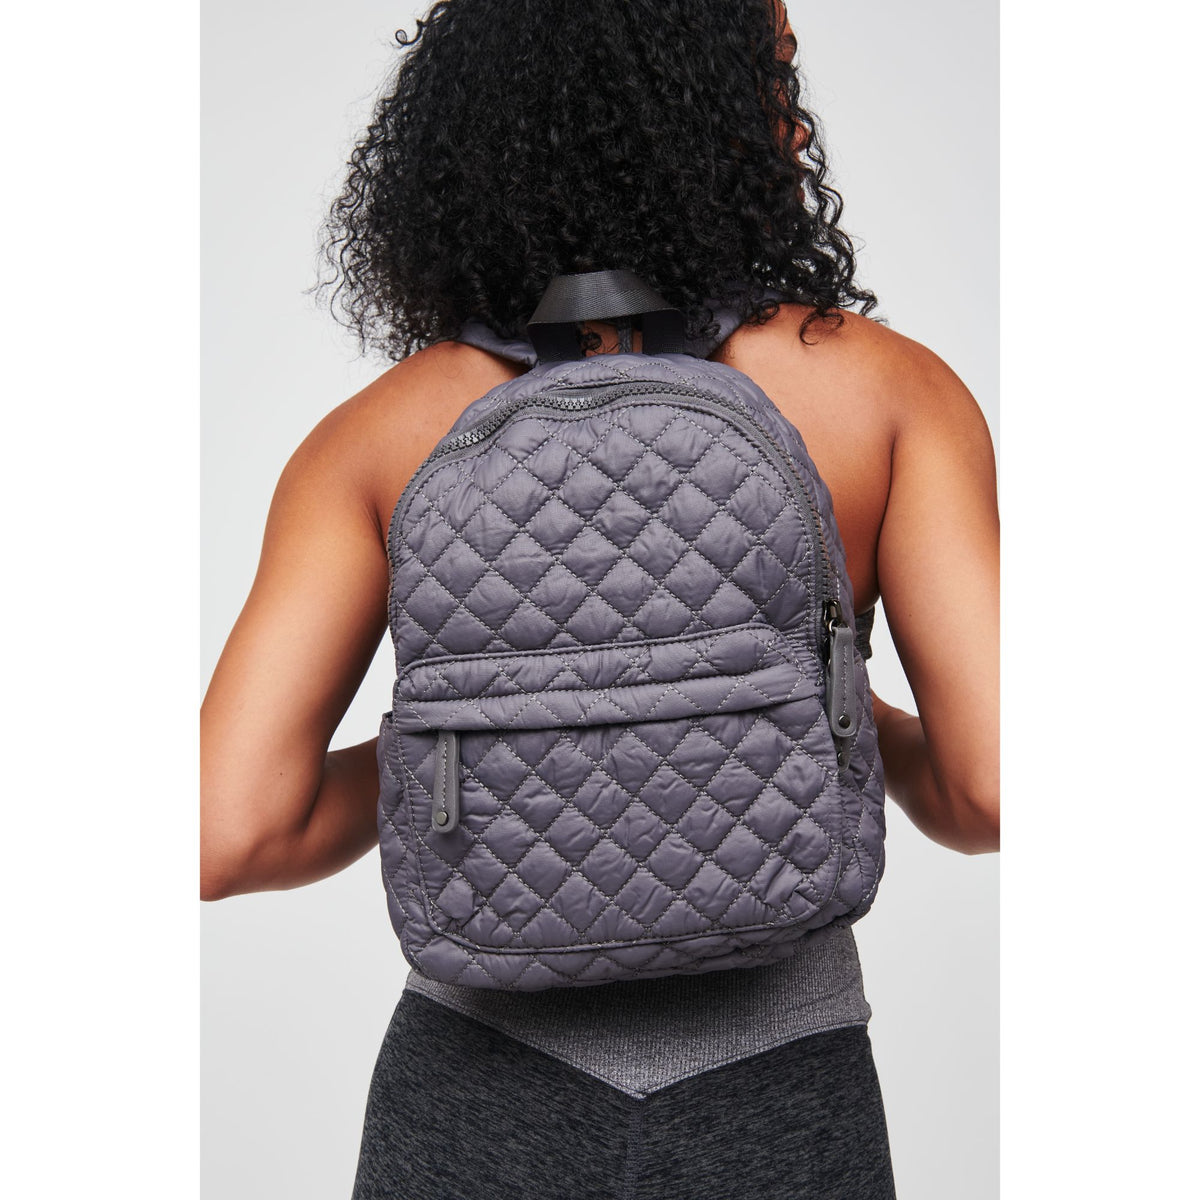 Woman wearing Carbon Urban Expressions Swish Backpack 840611175748 View 1 | Carbon